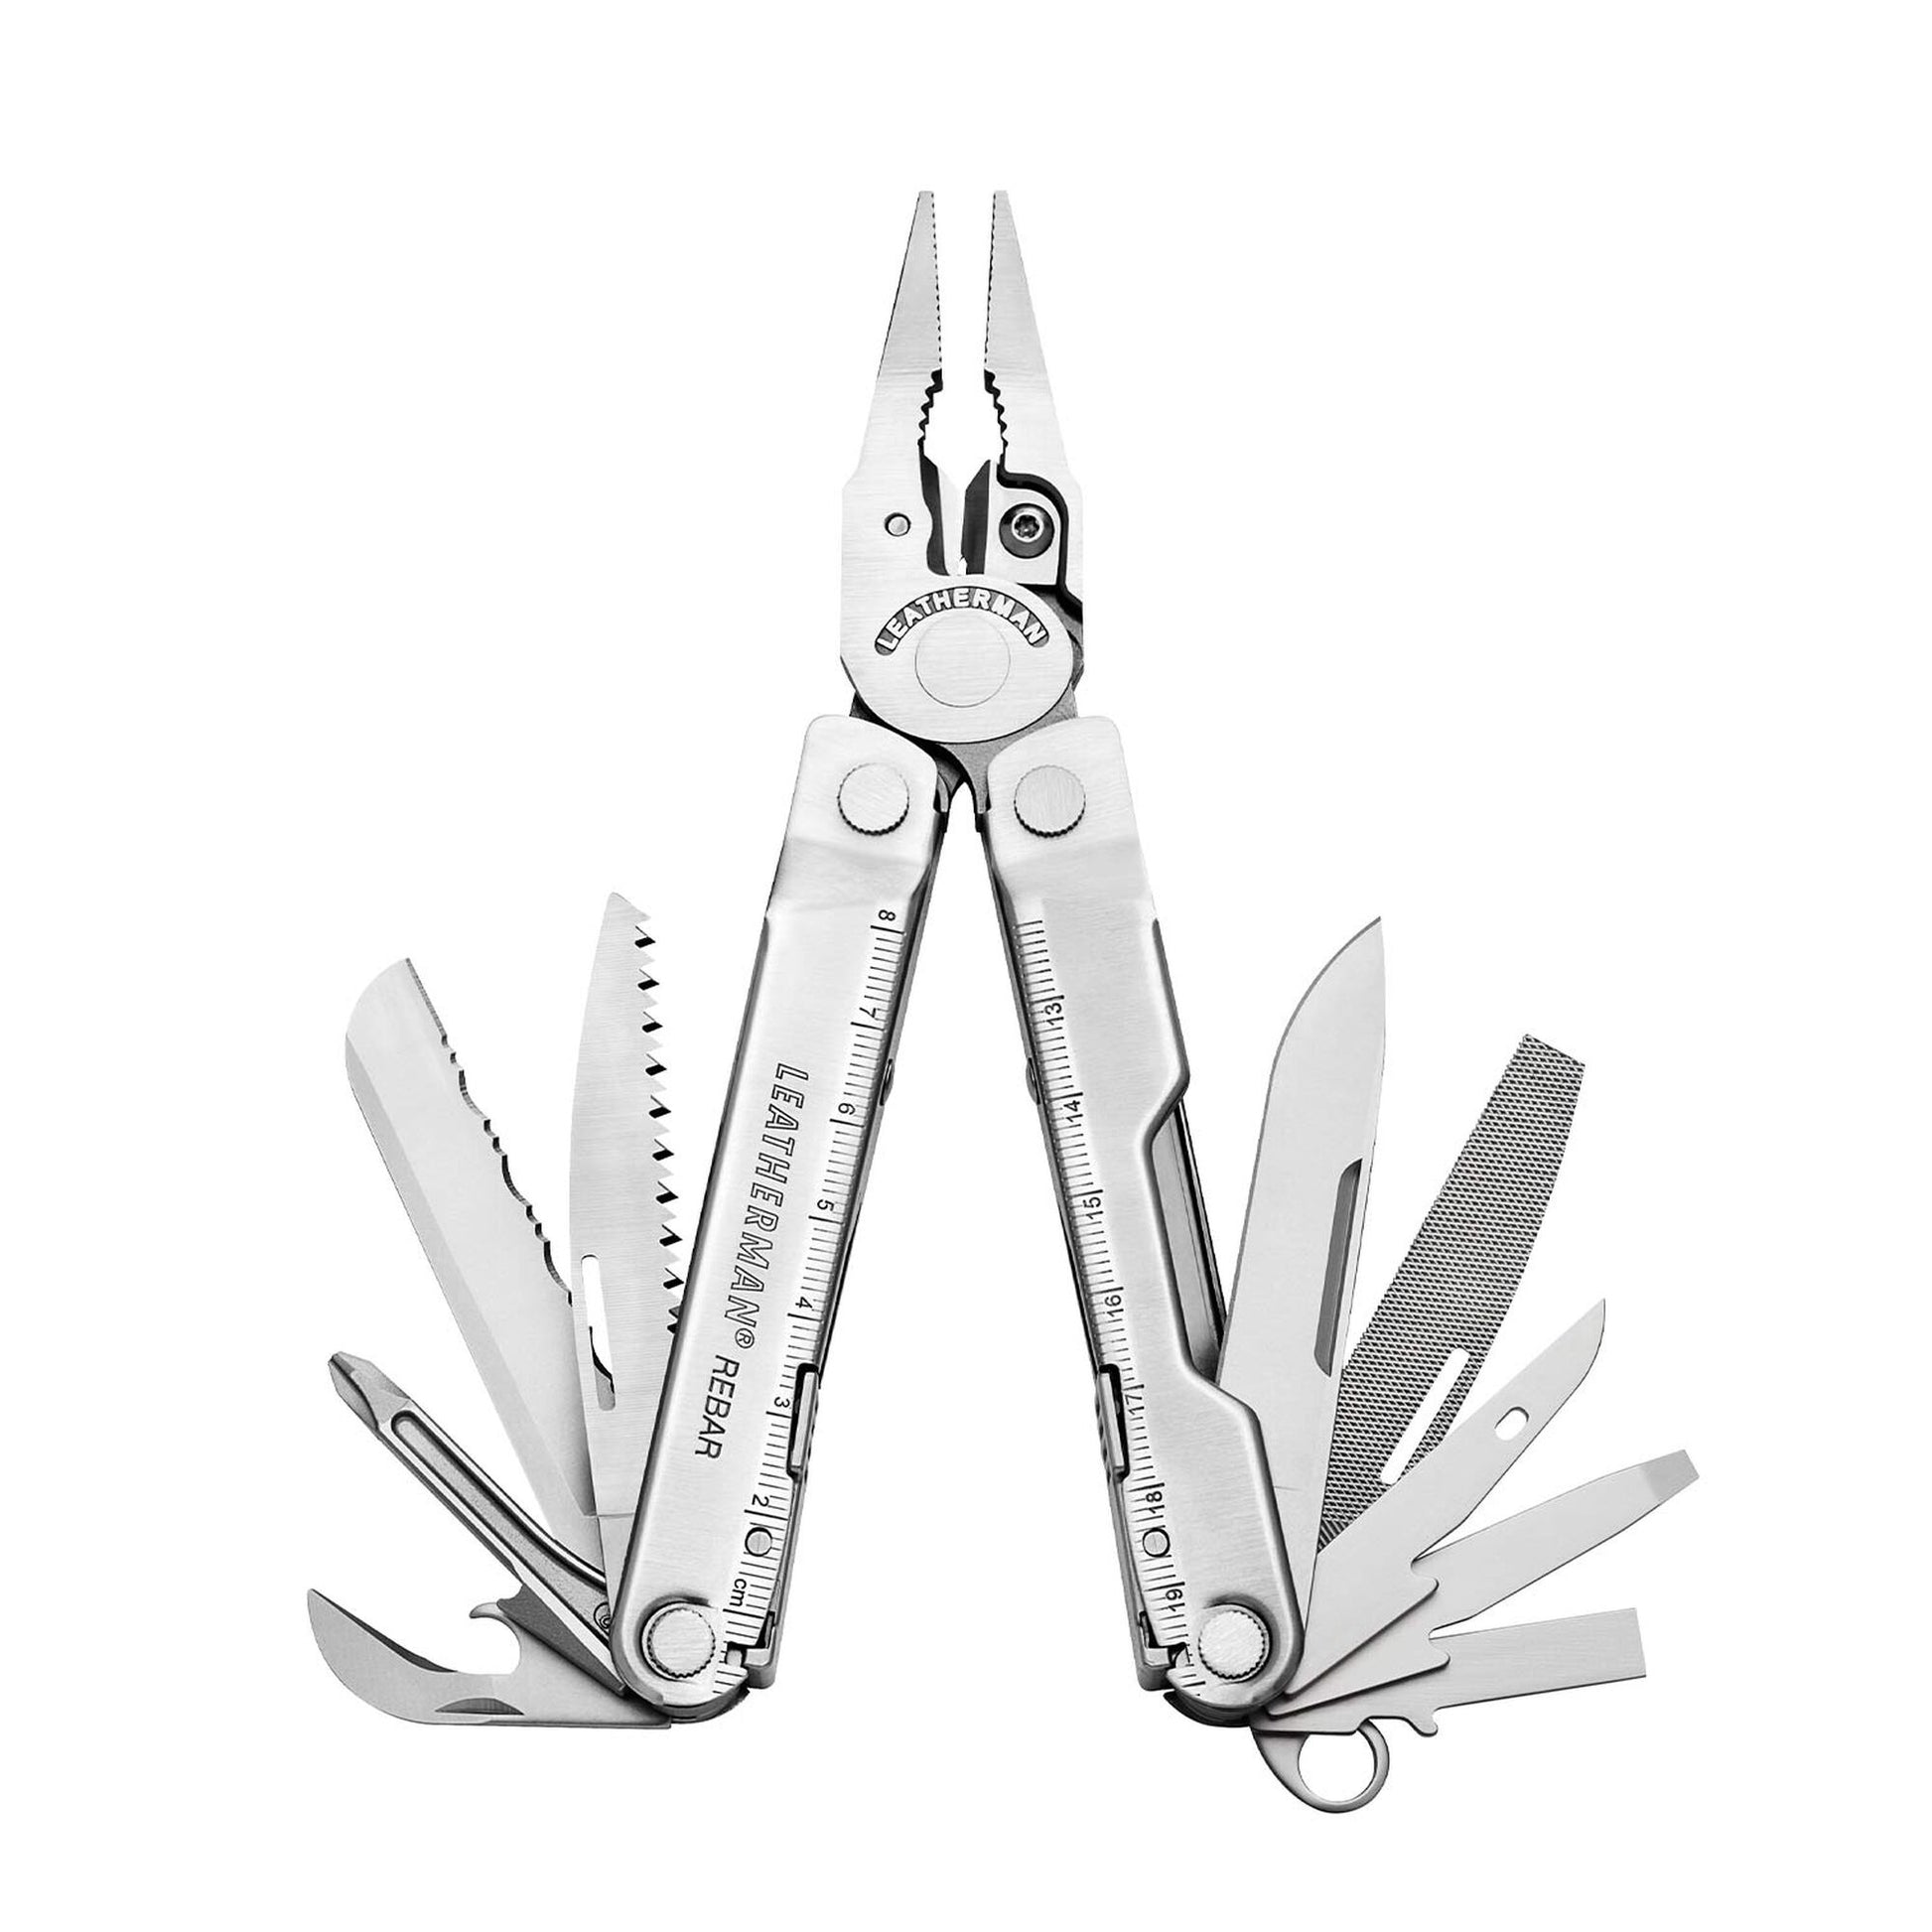 Pince Leatherman Rebar - Outil multifonctions (17 outils) - Leatherman-T.A DEFENSE